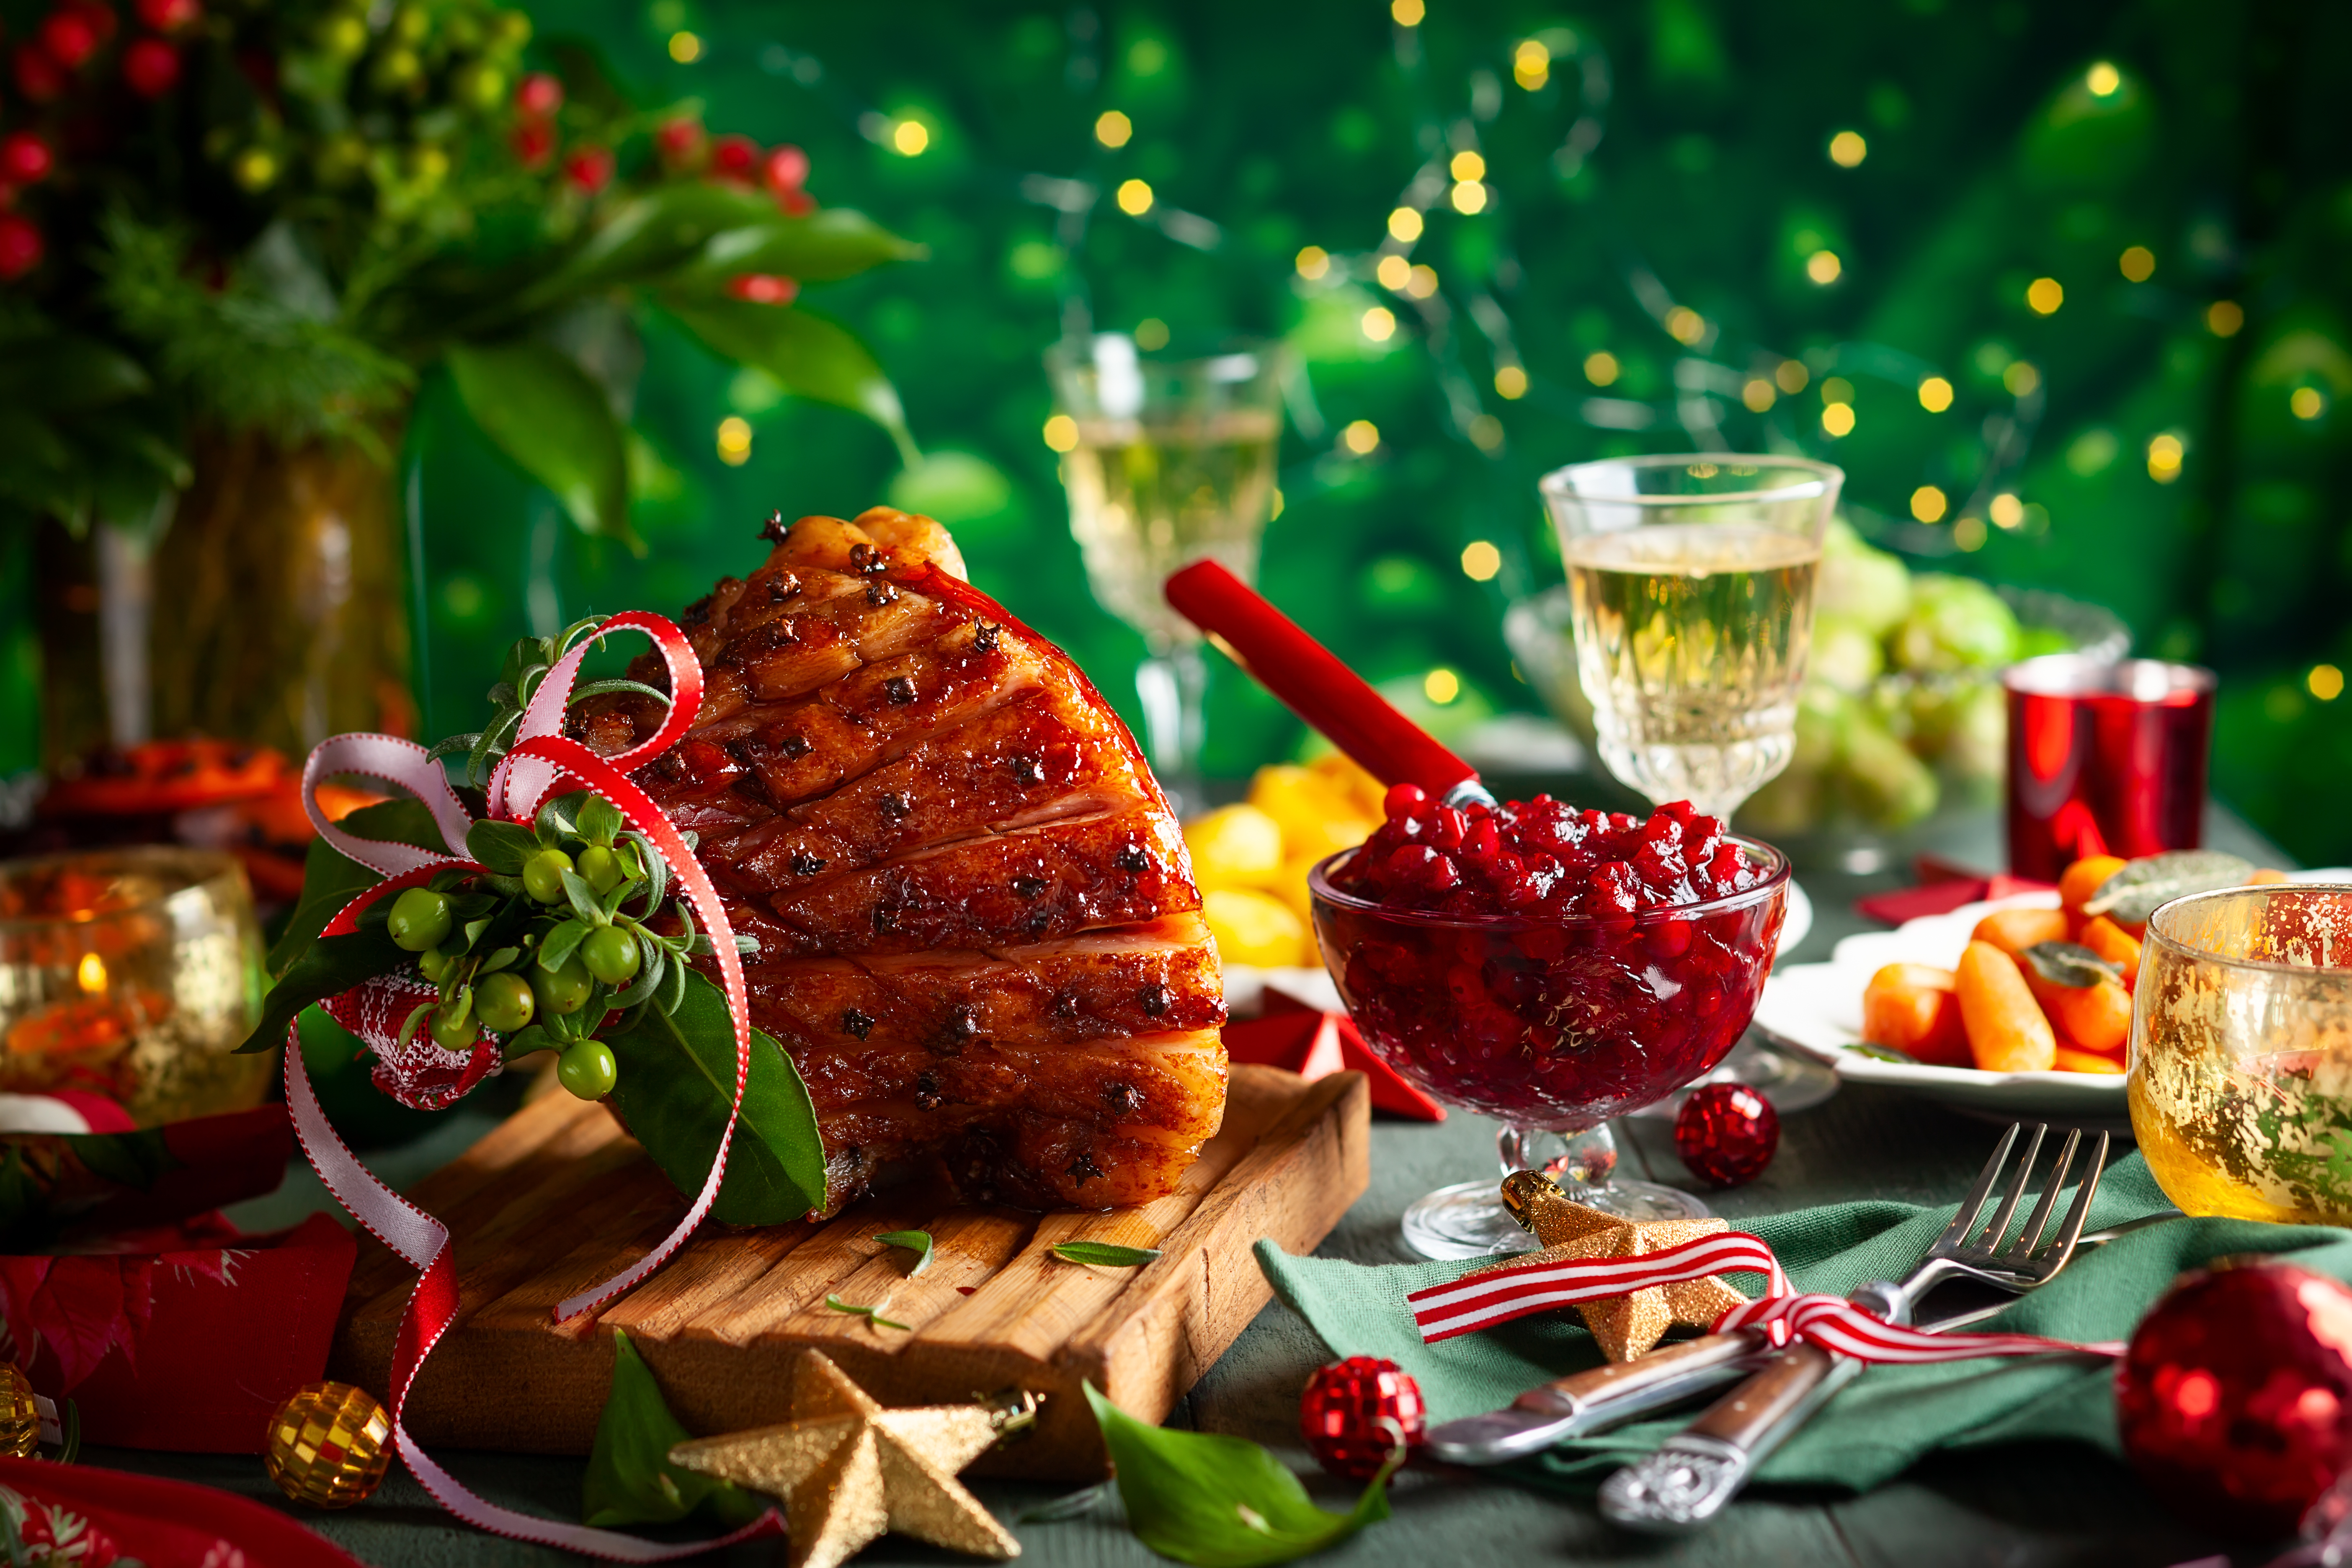 Glazed roast ham with cloves,sparkling wine and traditional vegetables dishes for Christmas dinner.